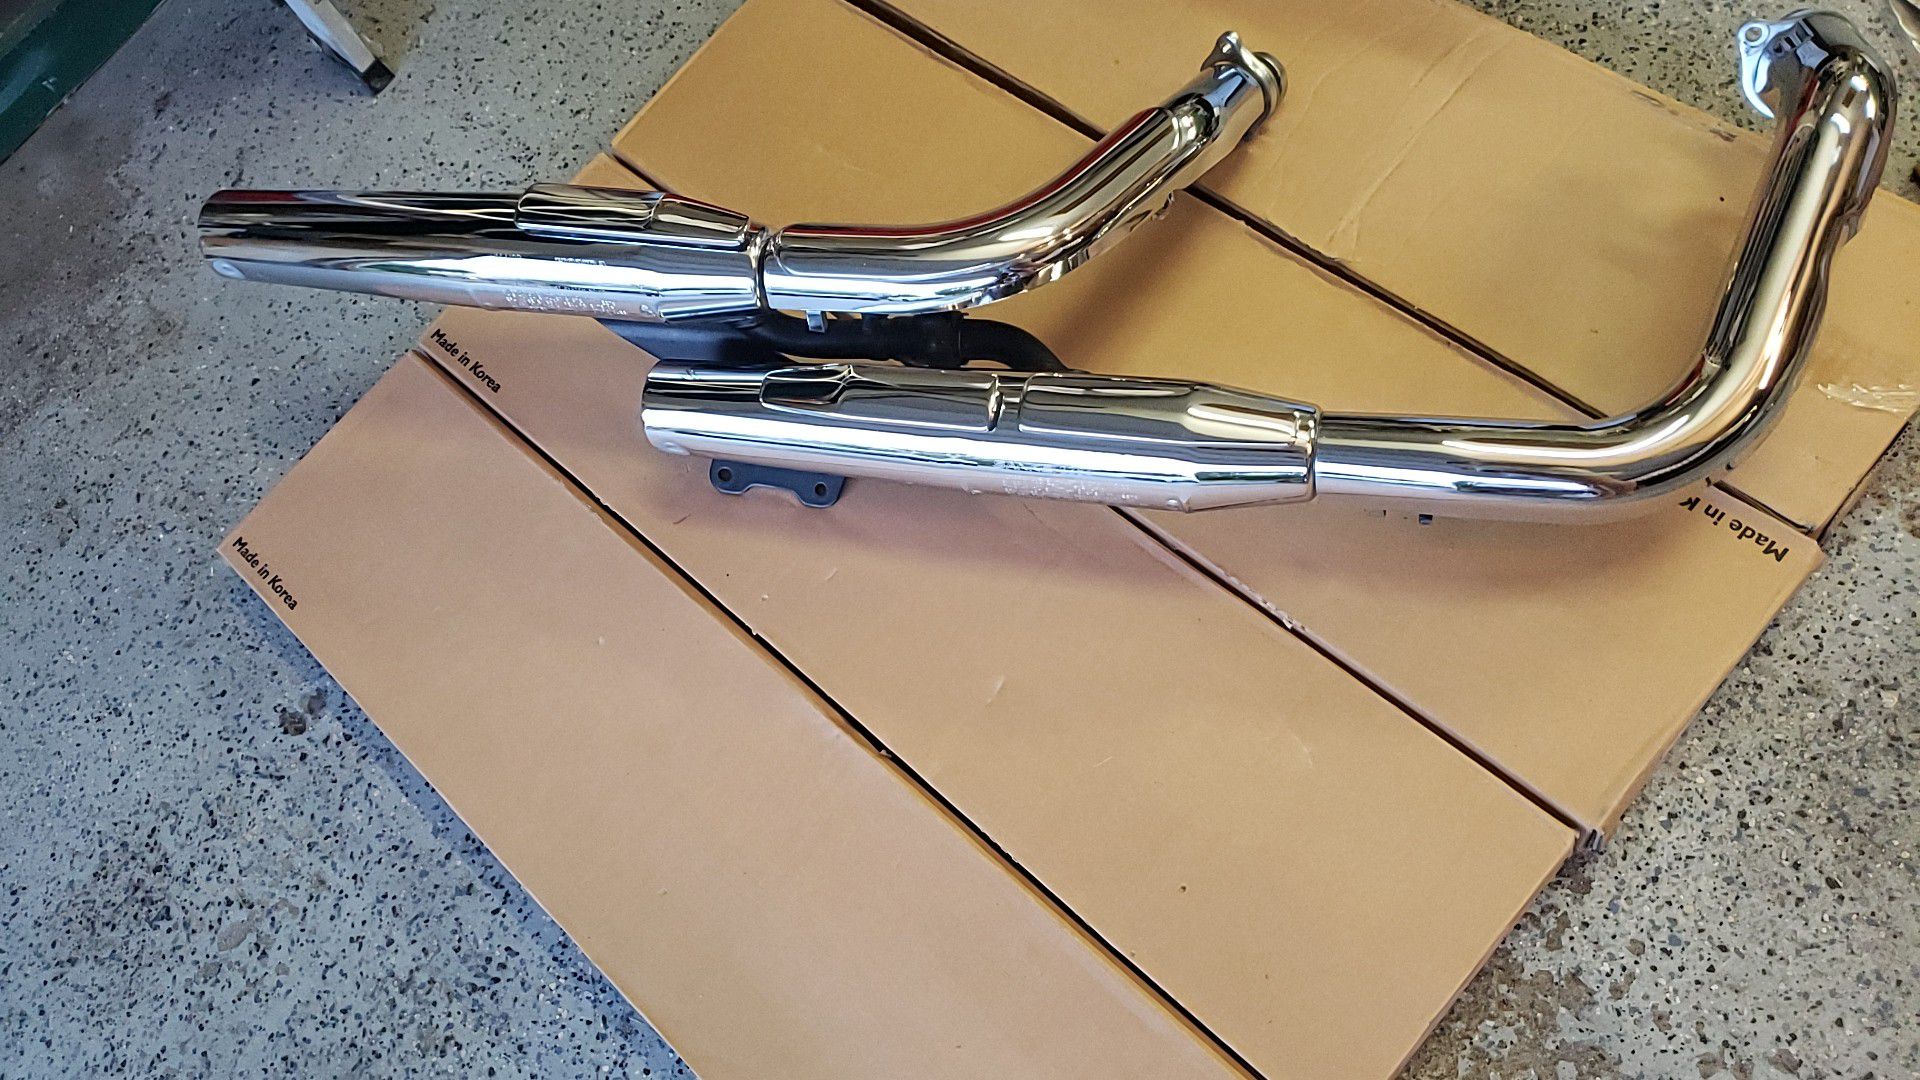 2007 Honda Shadow Spirit motorcycle, chrome exhaust pipe, factory. Never used.